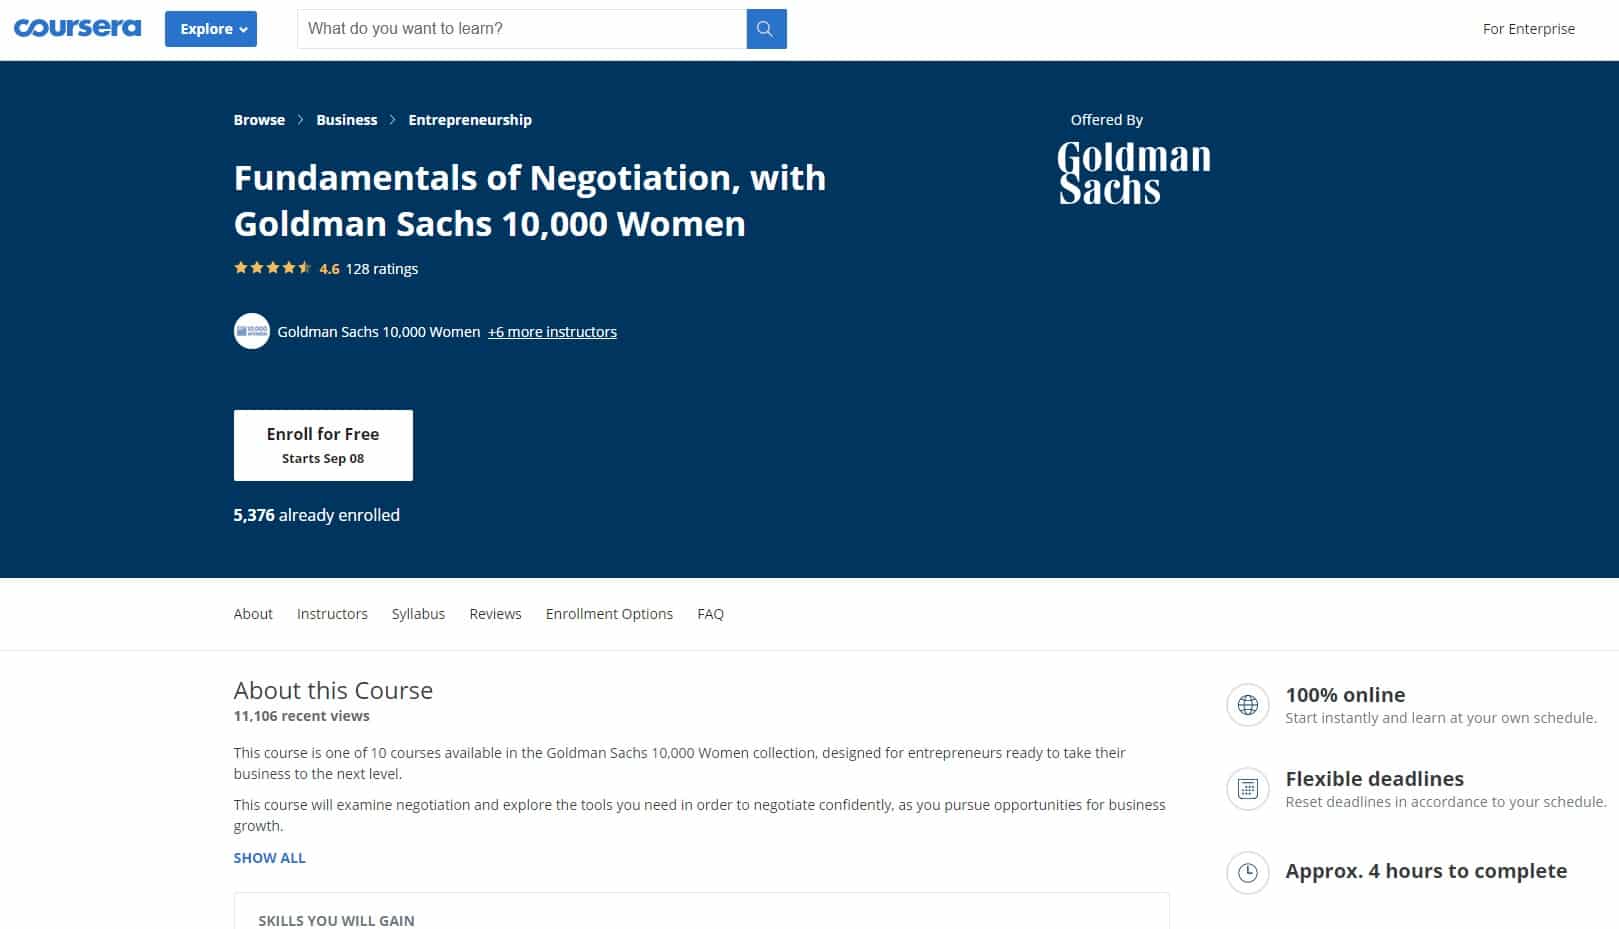 Coursera 3 Negotiation Lessons for Beginners